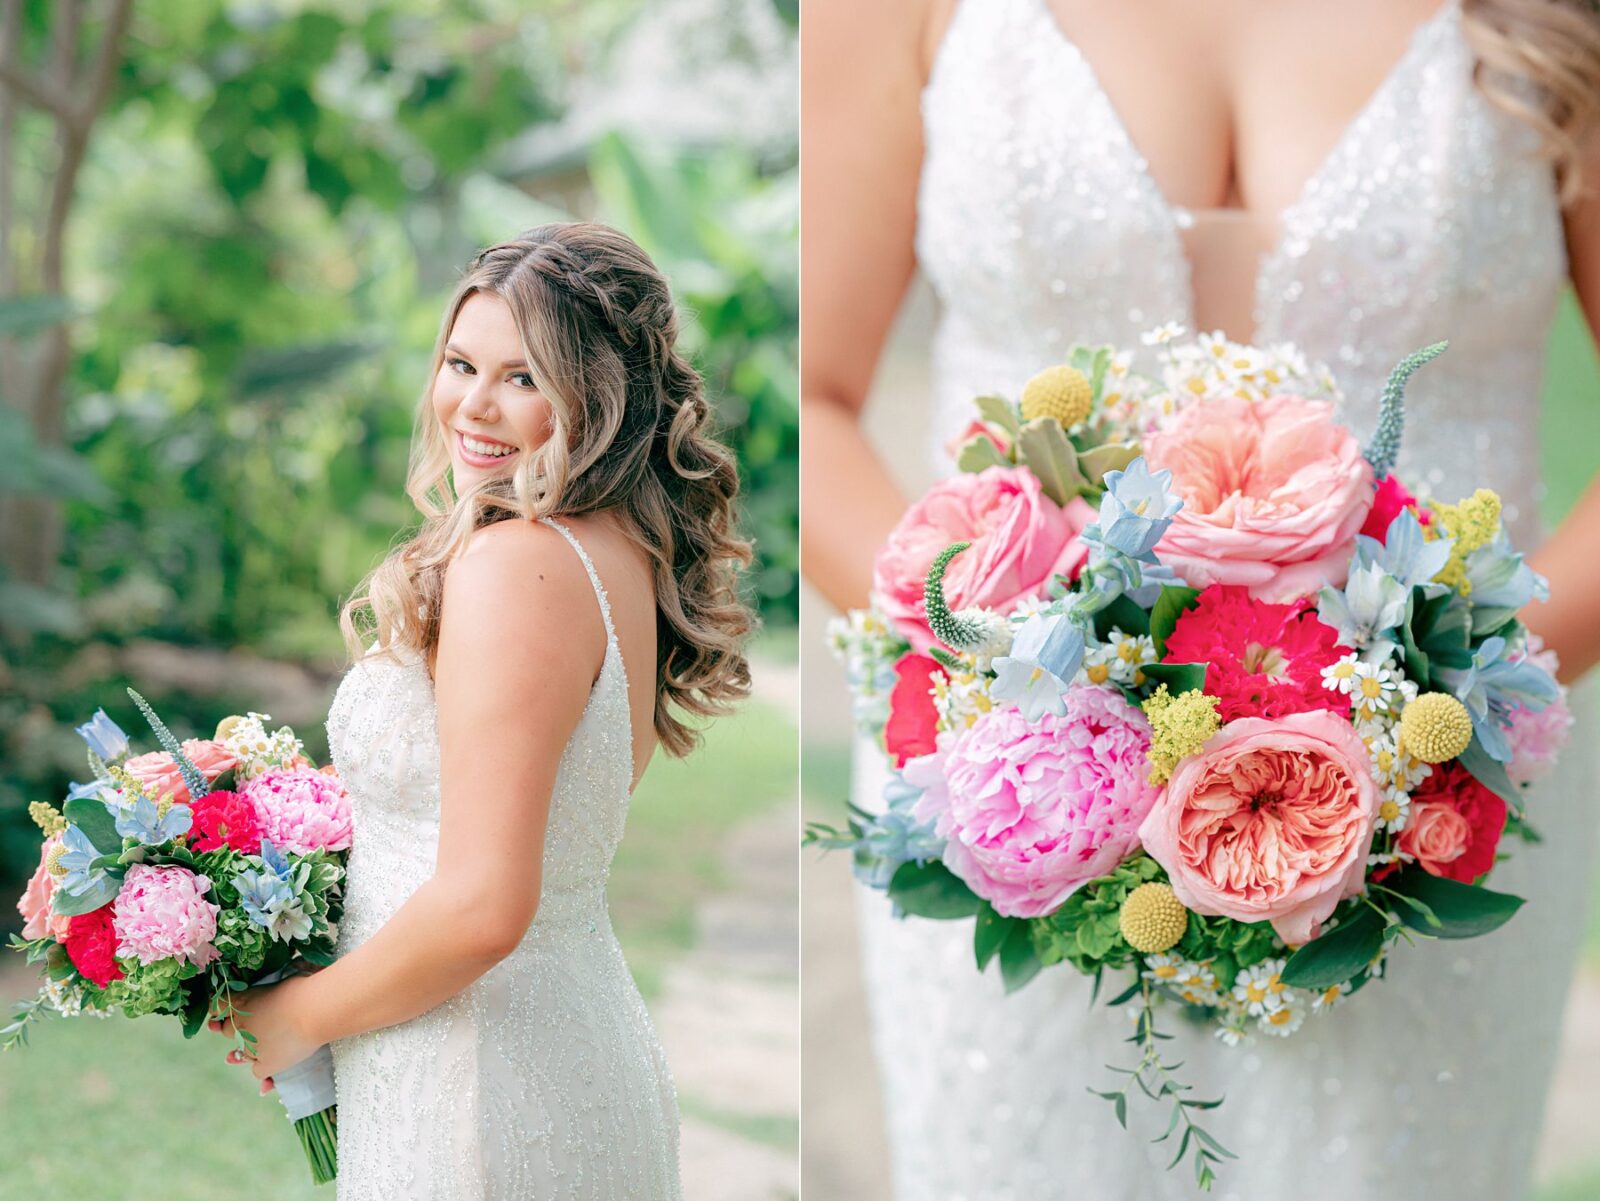 beautiful and bright bridal portraits with amazing colorful wedding bouquet, Austin Wedding at Hummingbird House, with wedding photos by Tara Lyons Photography. Other vendors: Mistique Makeup, Cana Events, Twin Flame Events, Simply Chic Event Rentals, Live Oak Photo Booth